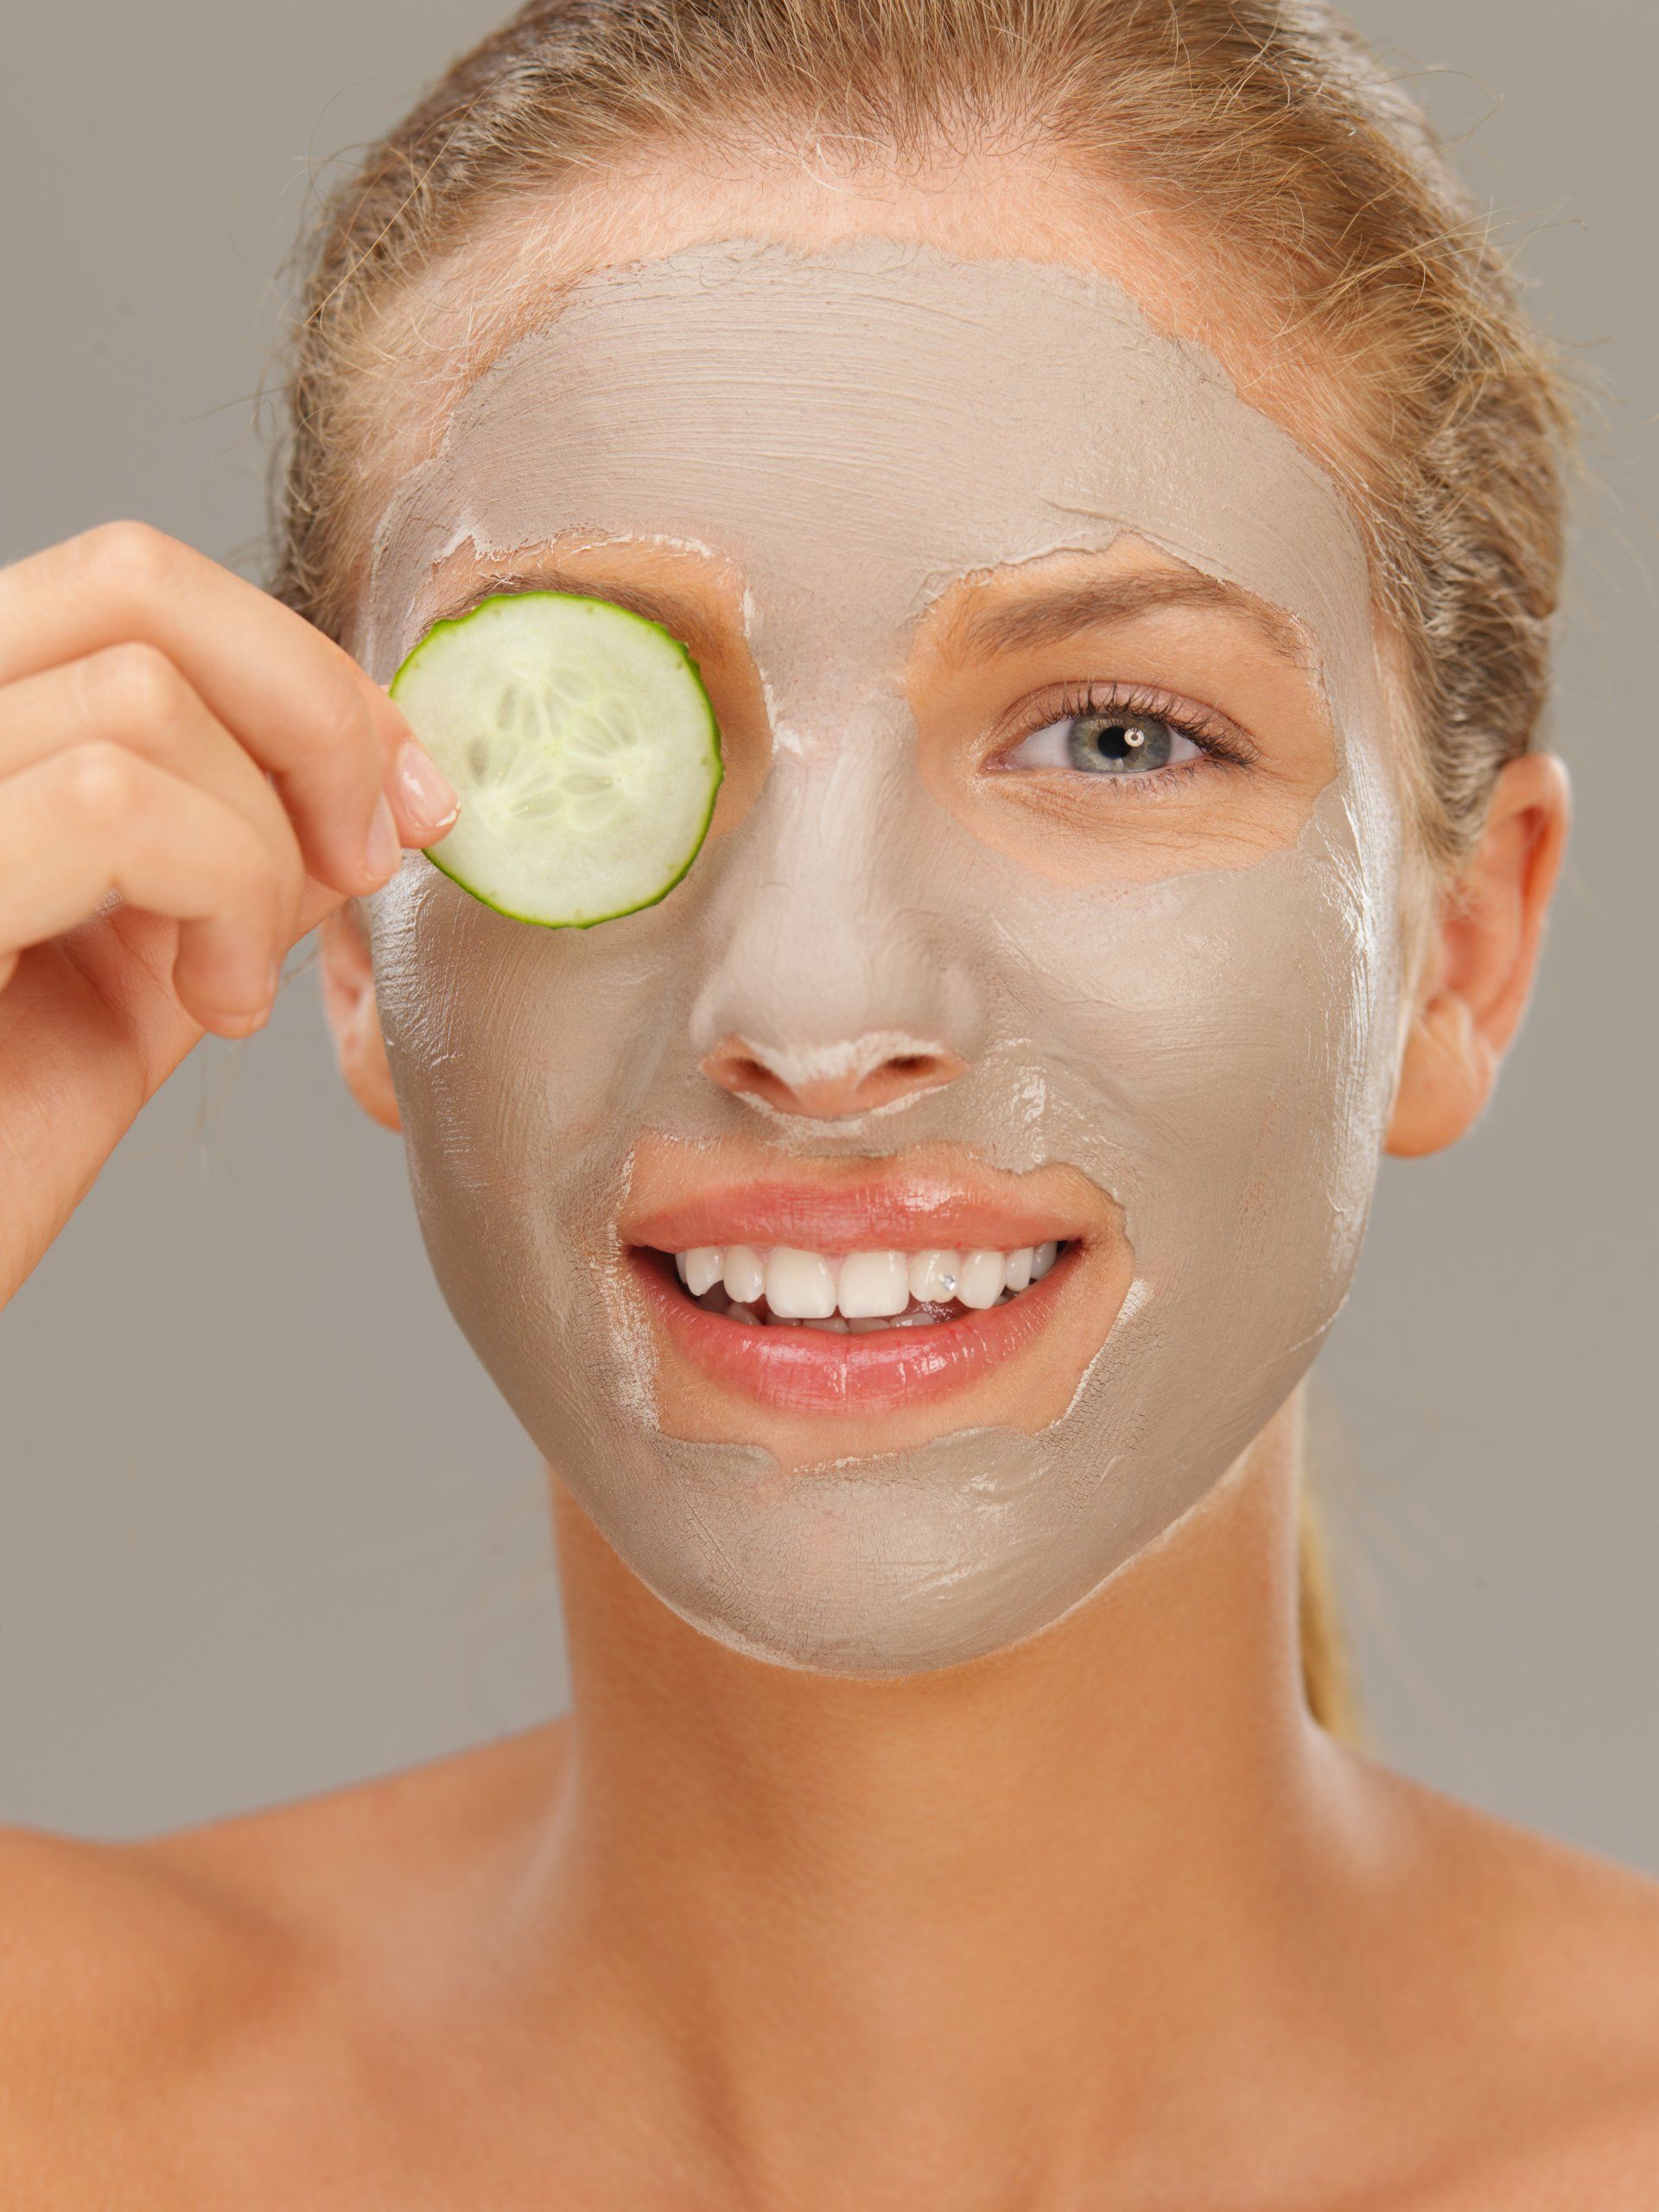 A woman holding a cucumber on her eyes as she wears a facial mask